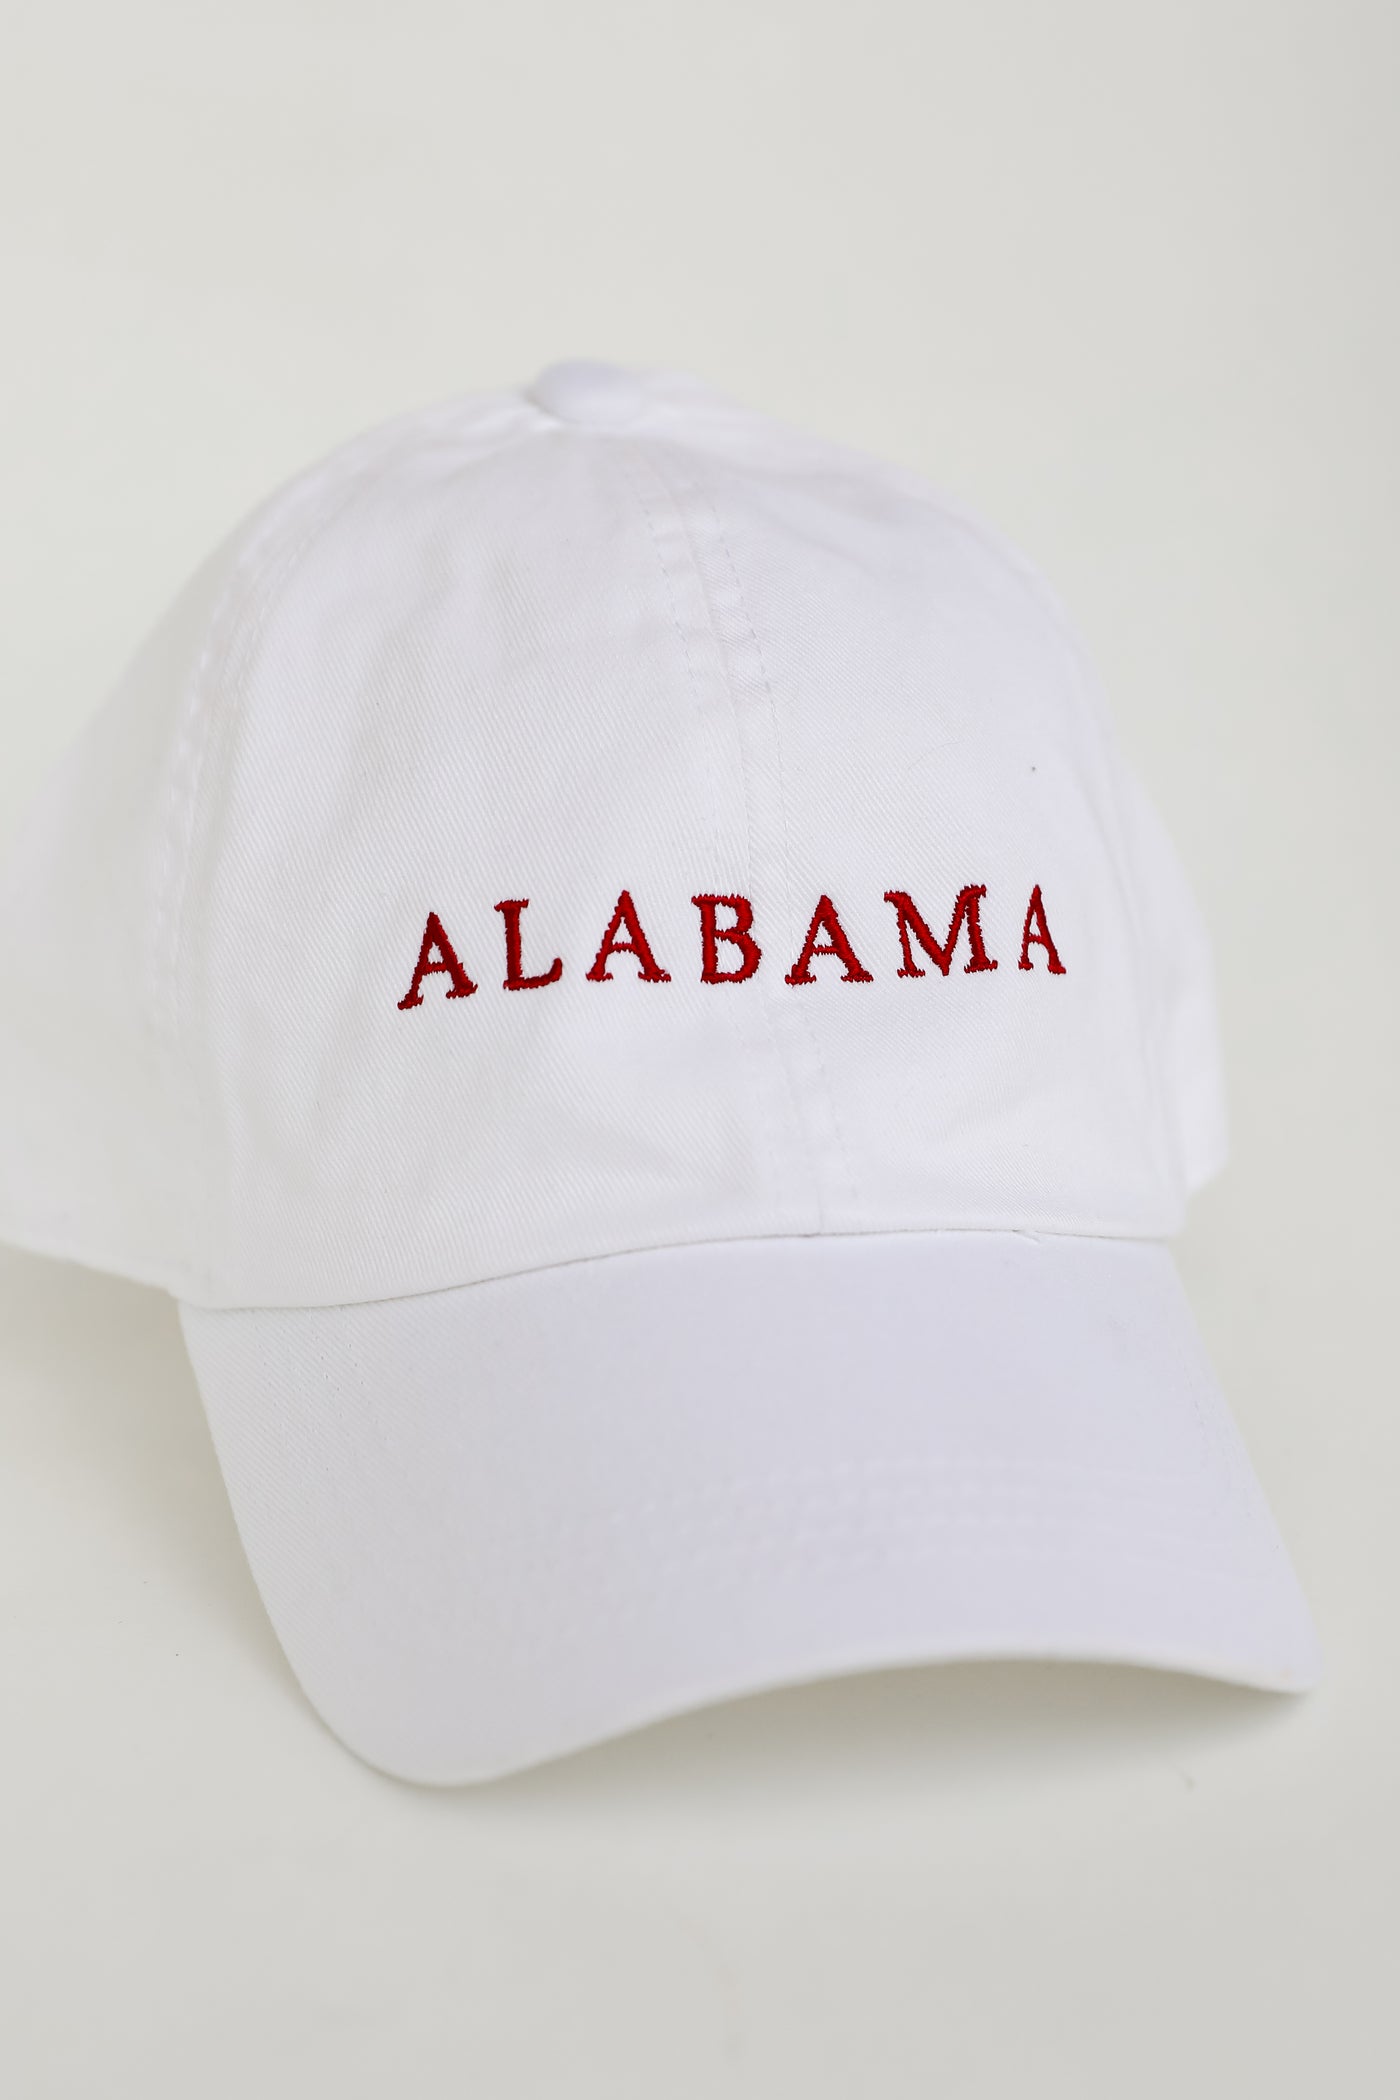 Alabama Embroidered Hat flat lay